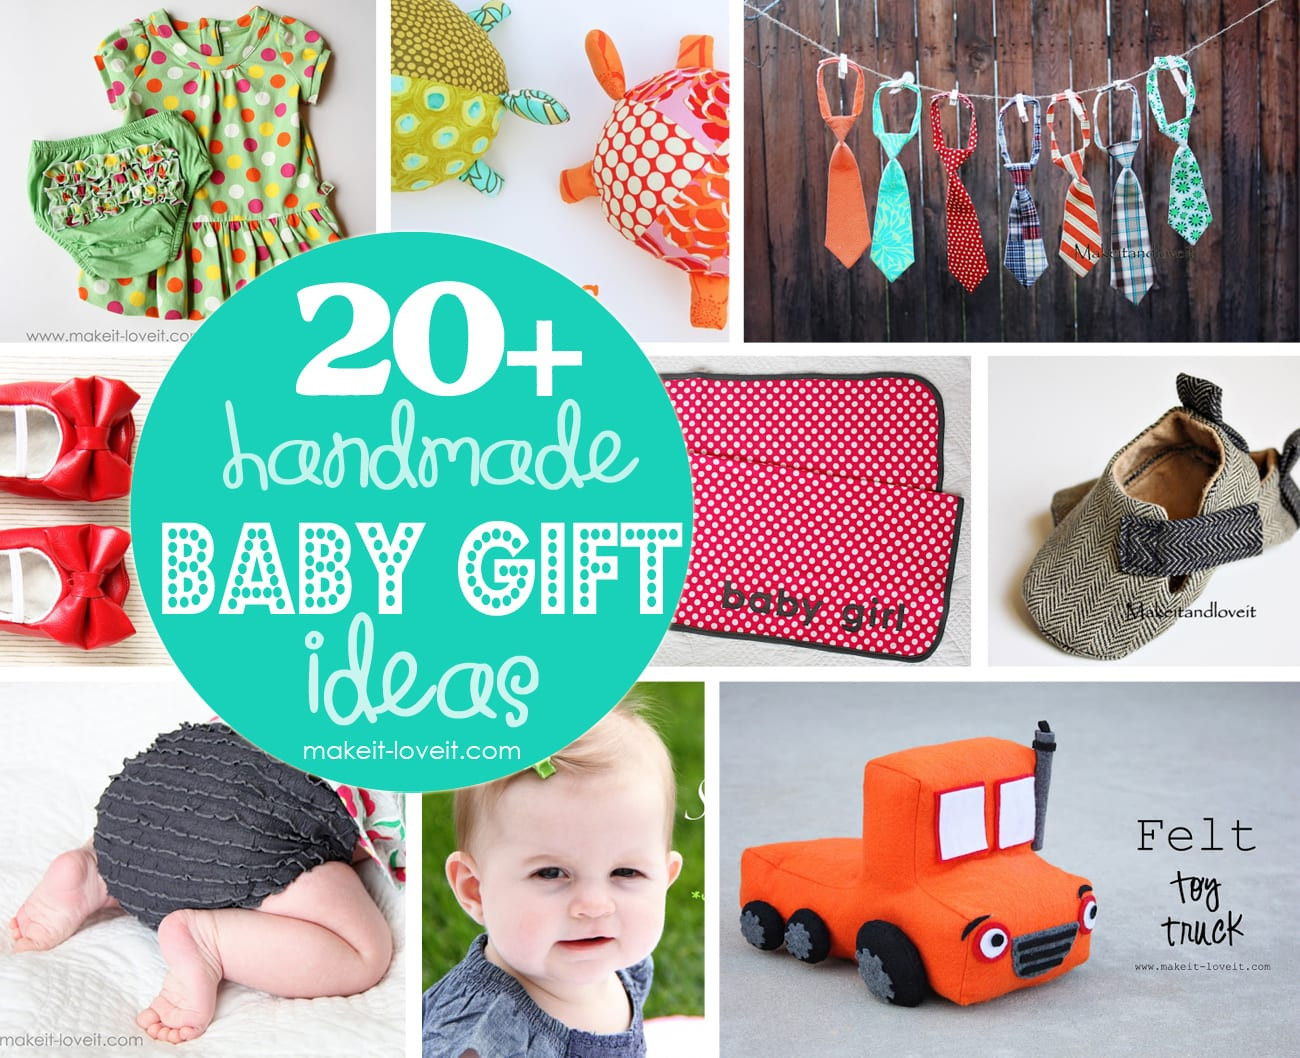 Baby Photo Gift Ideas
 20 Handmade Craft Ideas for Baby Gifts